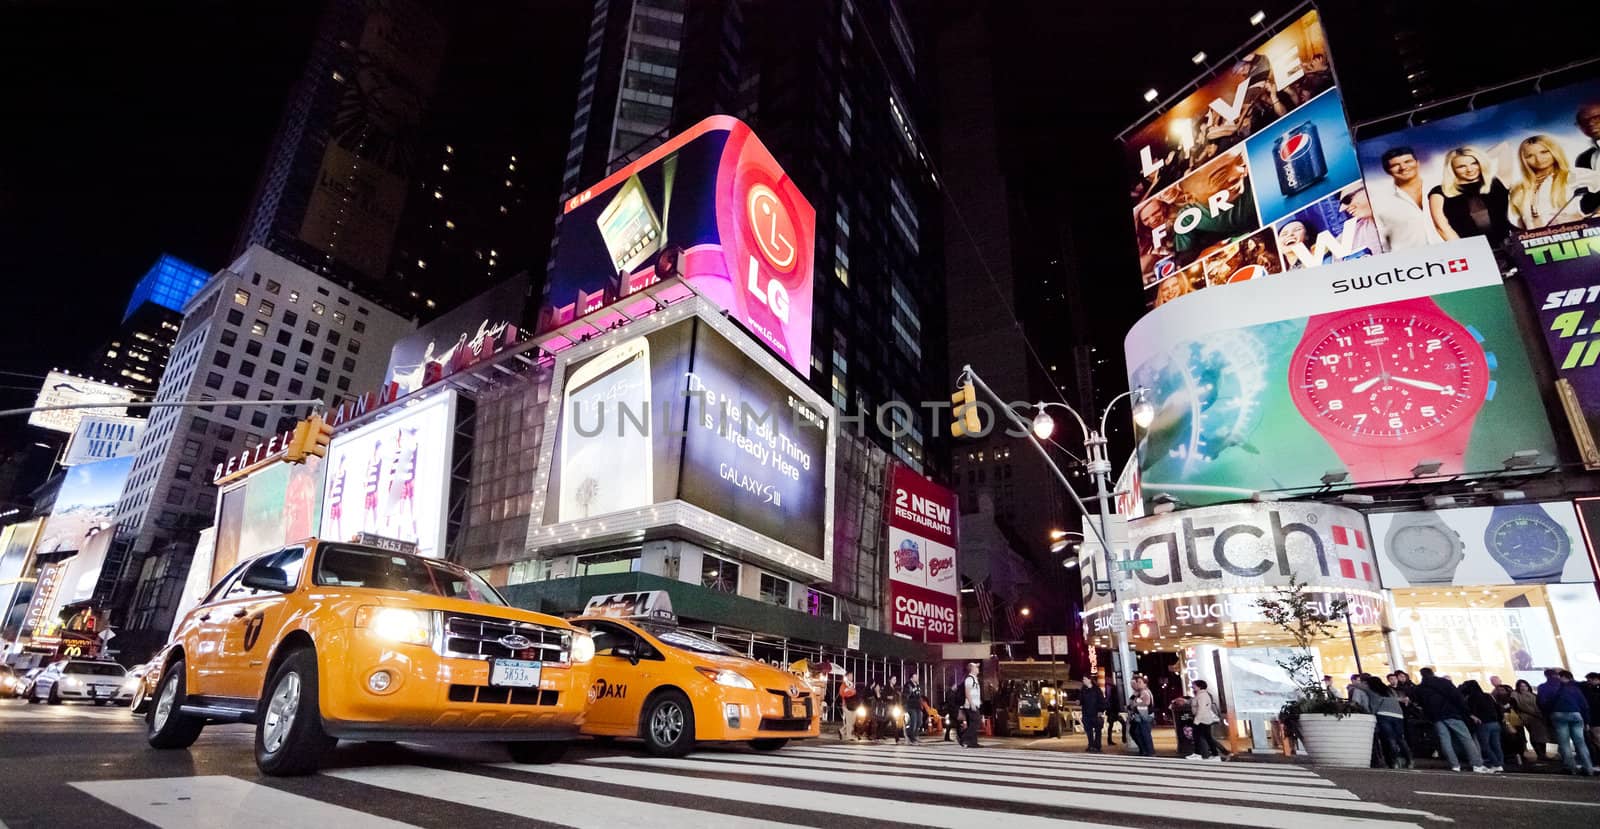 NEW YORK CITY - SEPT 26: Times Square by hanusst